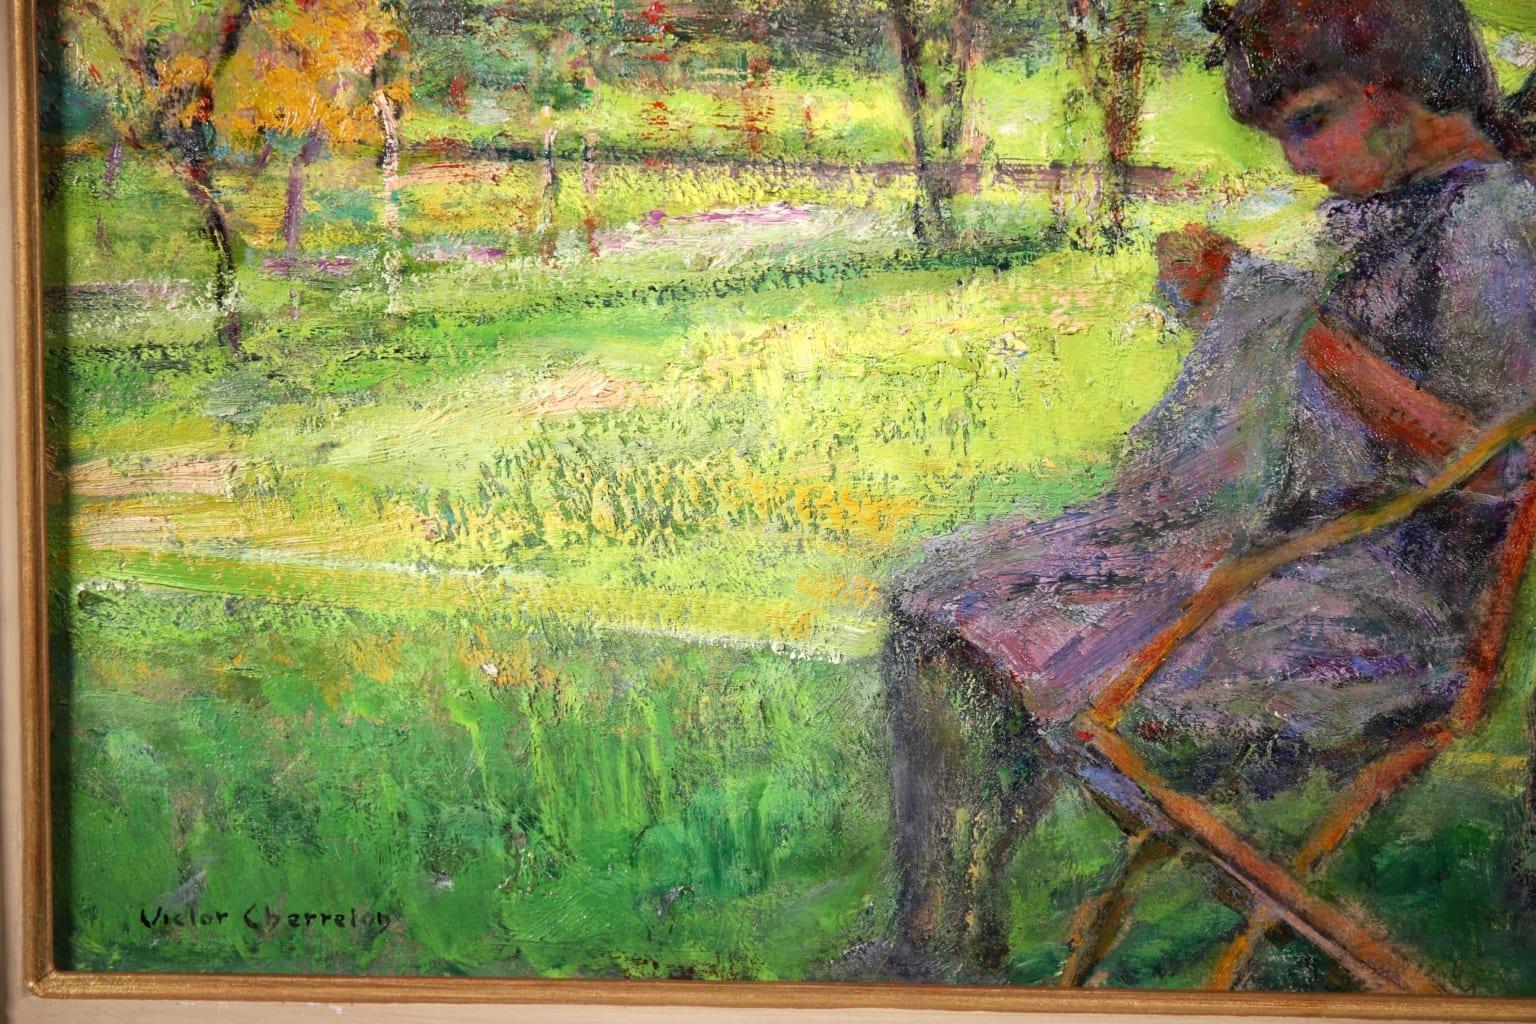 Signed figure in landscape oil on board circa 1920 by sought after French post impressionist painter Victor Charreton, who was known as the painter of colours. The piece depicts a young girl wearing a dress and a bow in her hair sewing as she sits